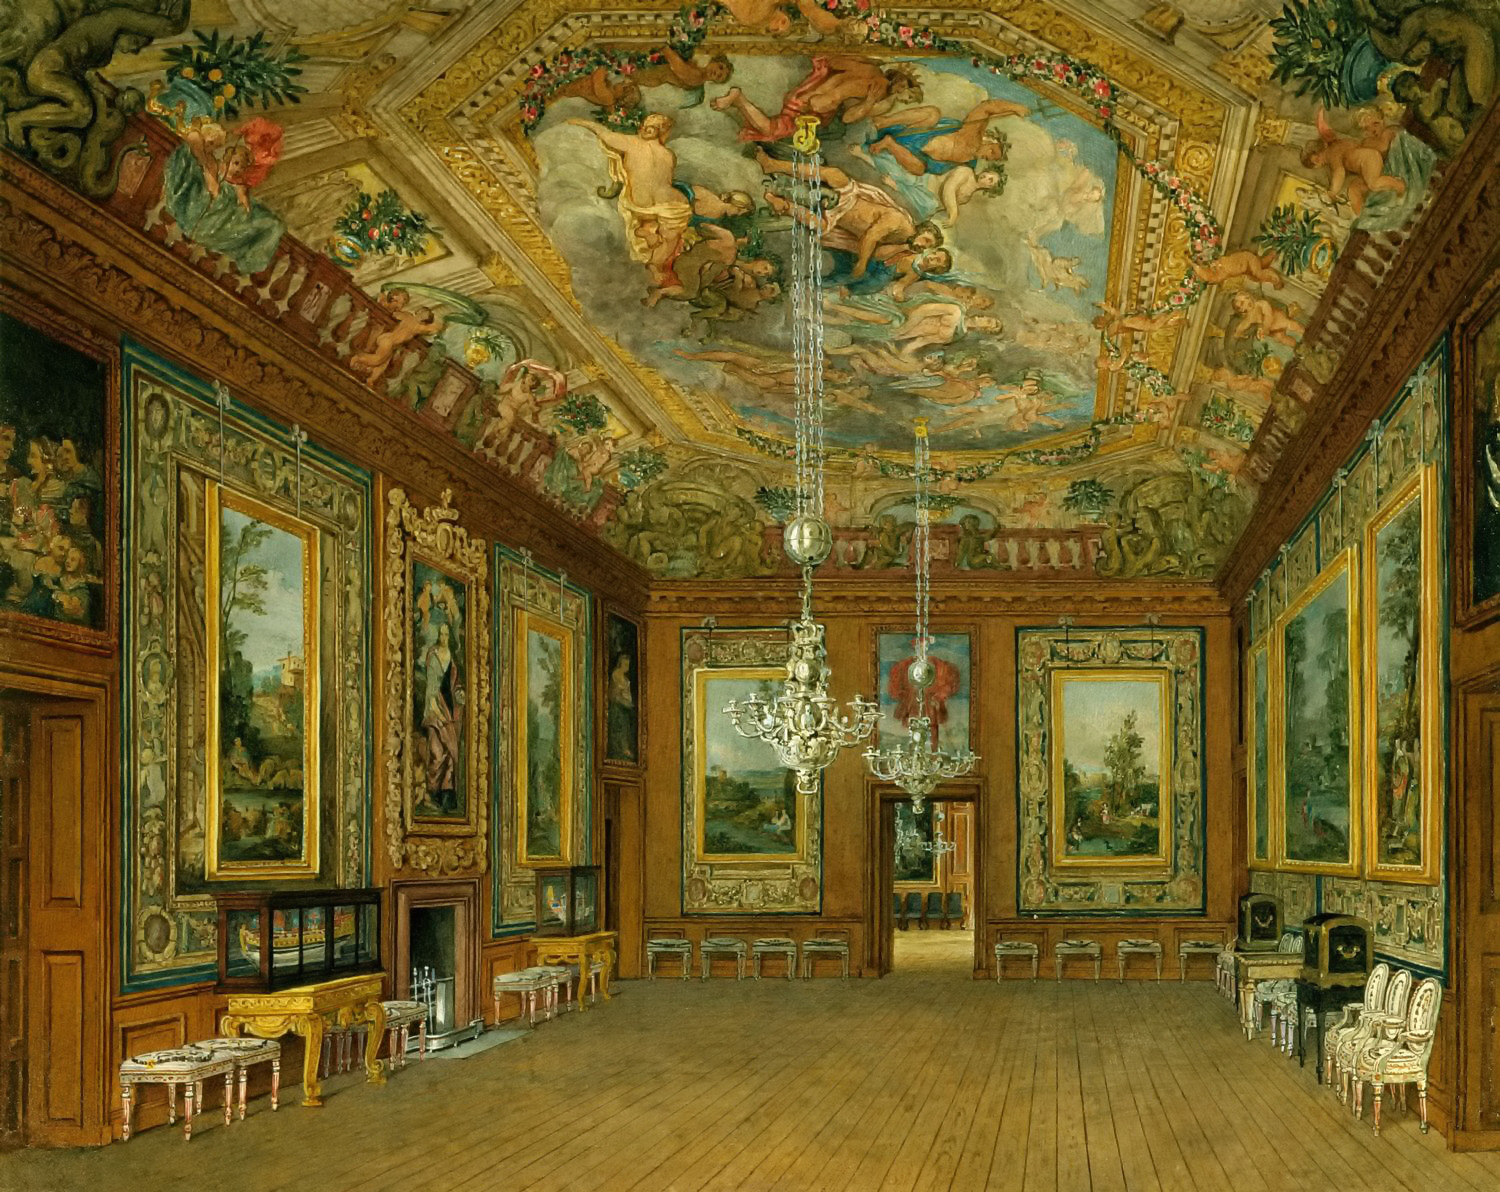 The Queen's Drawing Room, by Charles Wild, 1816